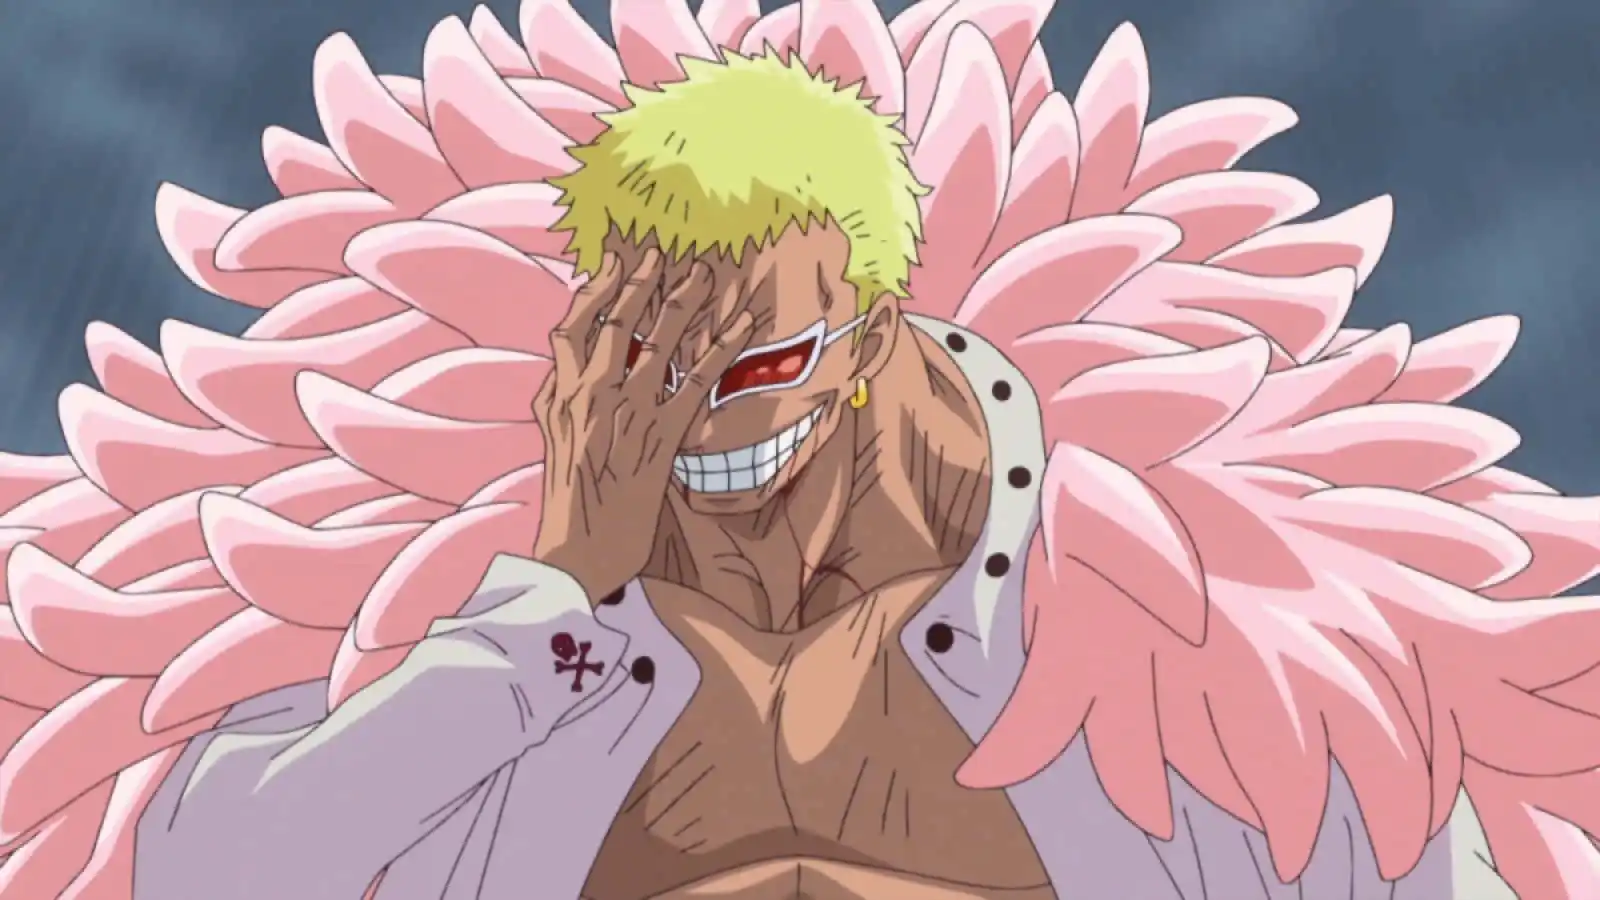 Donquixote laughing and looking evil in 'One Piece'